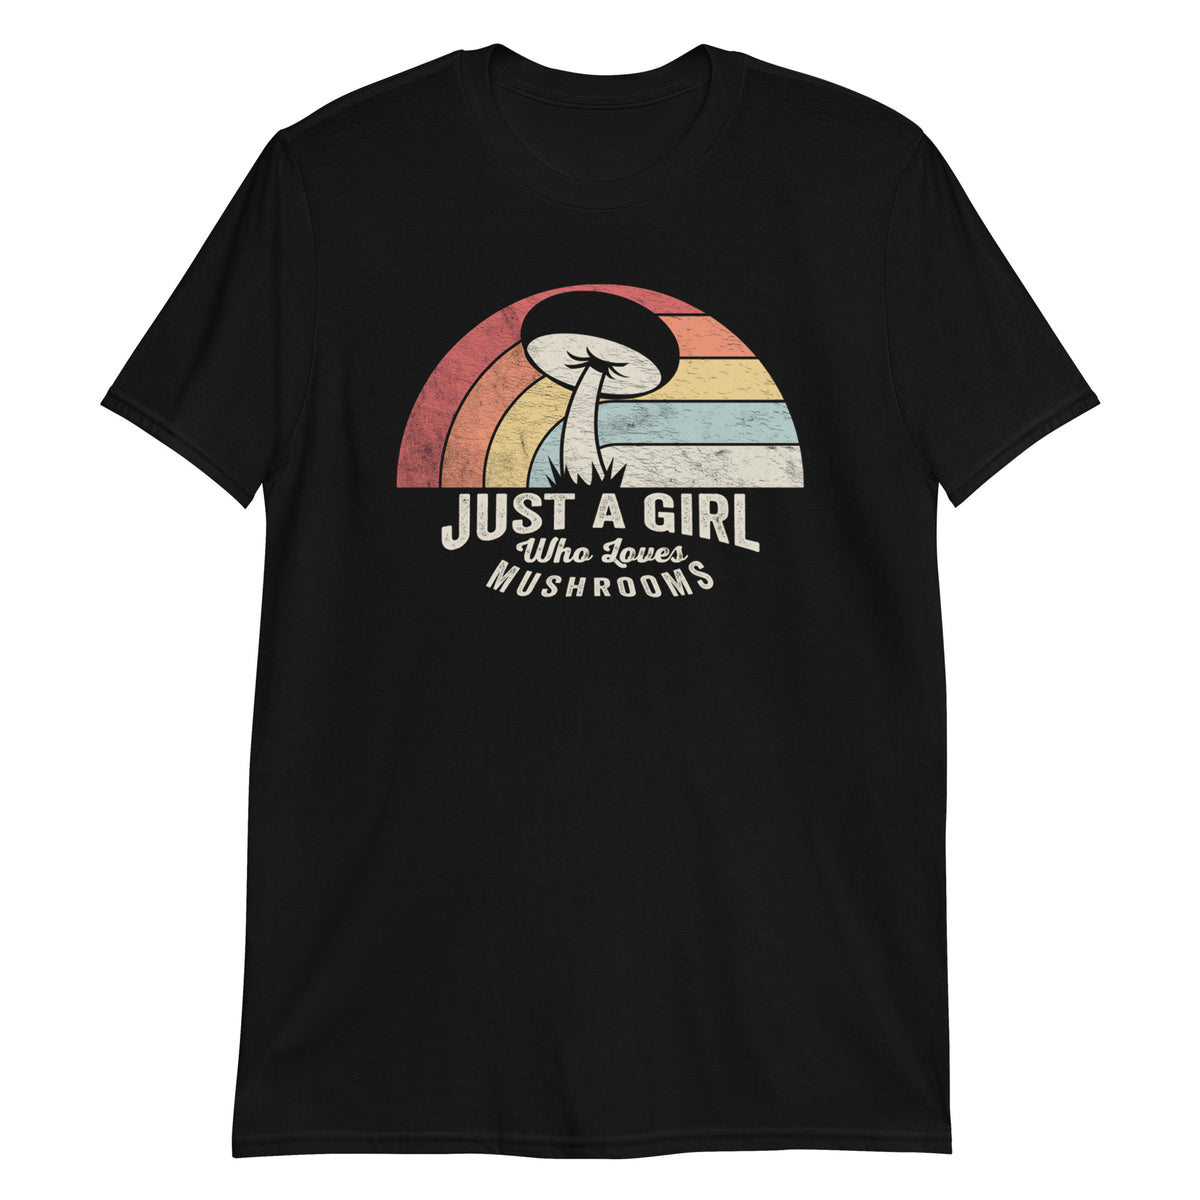 Just a Girl Who Loves  Mushrooms T-Shirt